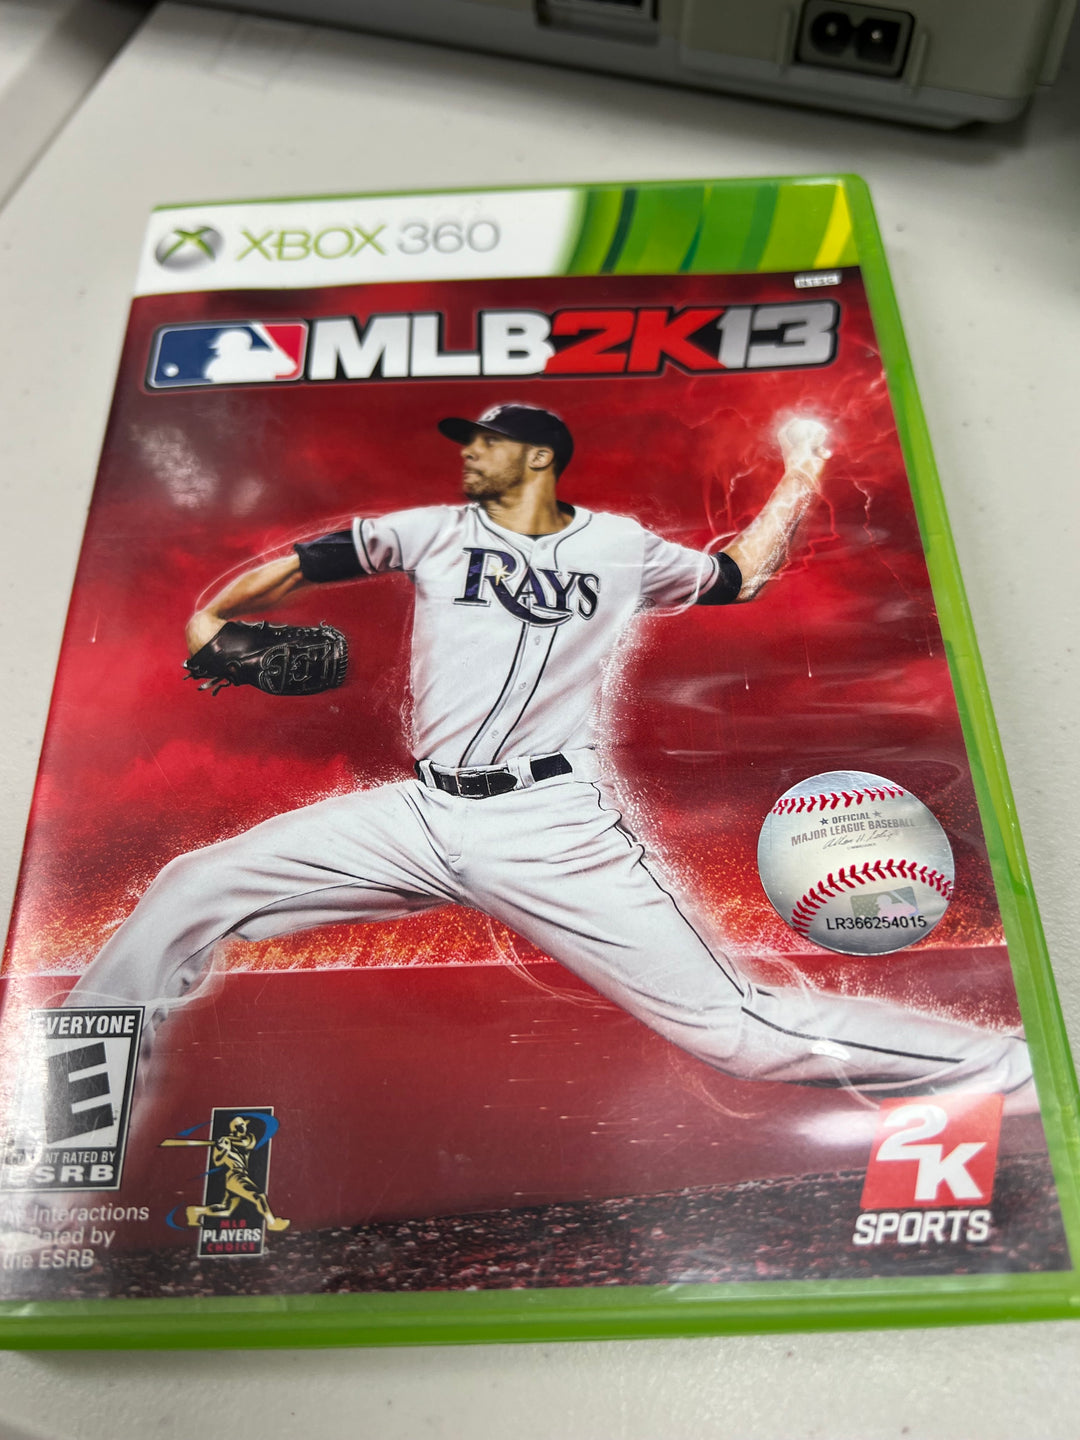 MLB 2K13 Major League Baseball for Microsoft Xbox 360 in case. Tested and working.     DO61024